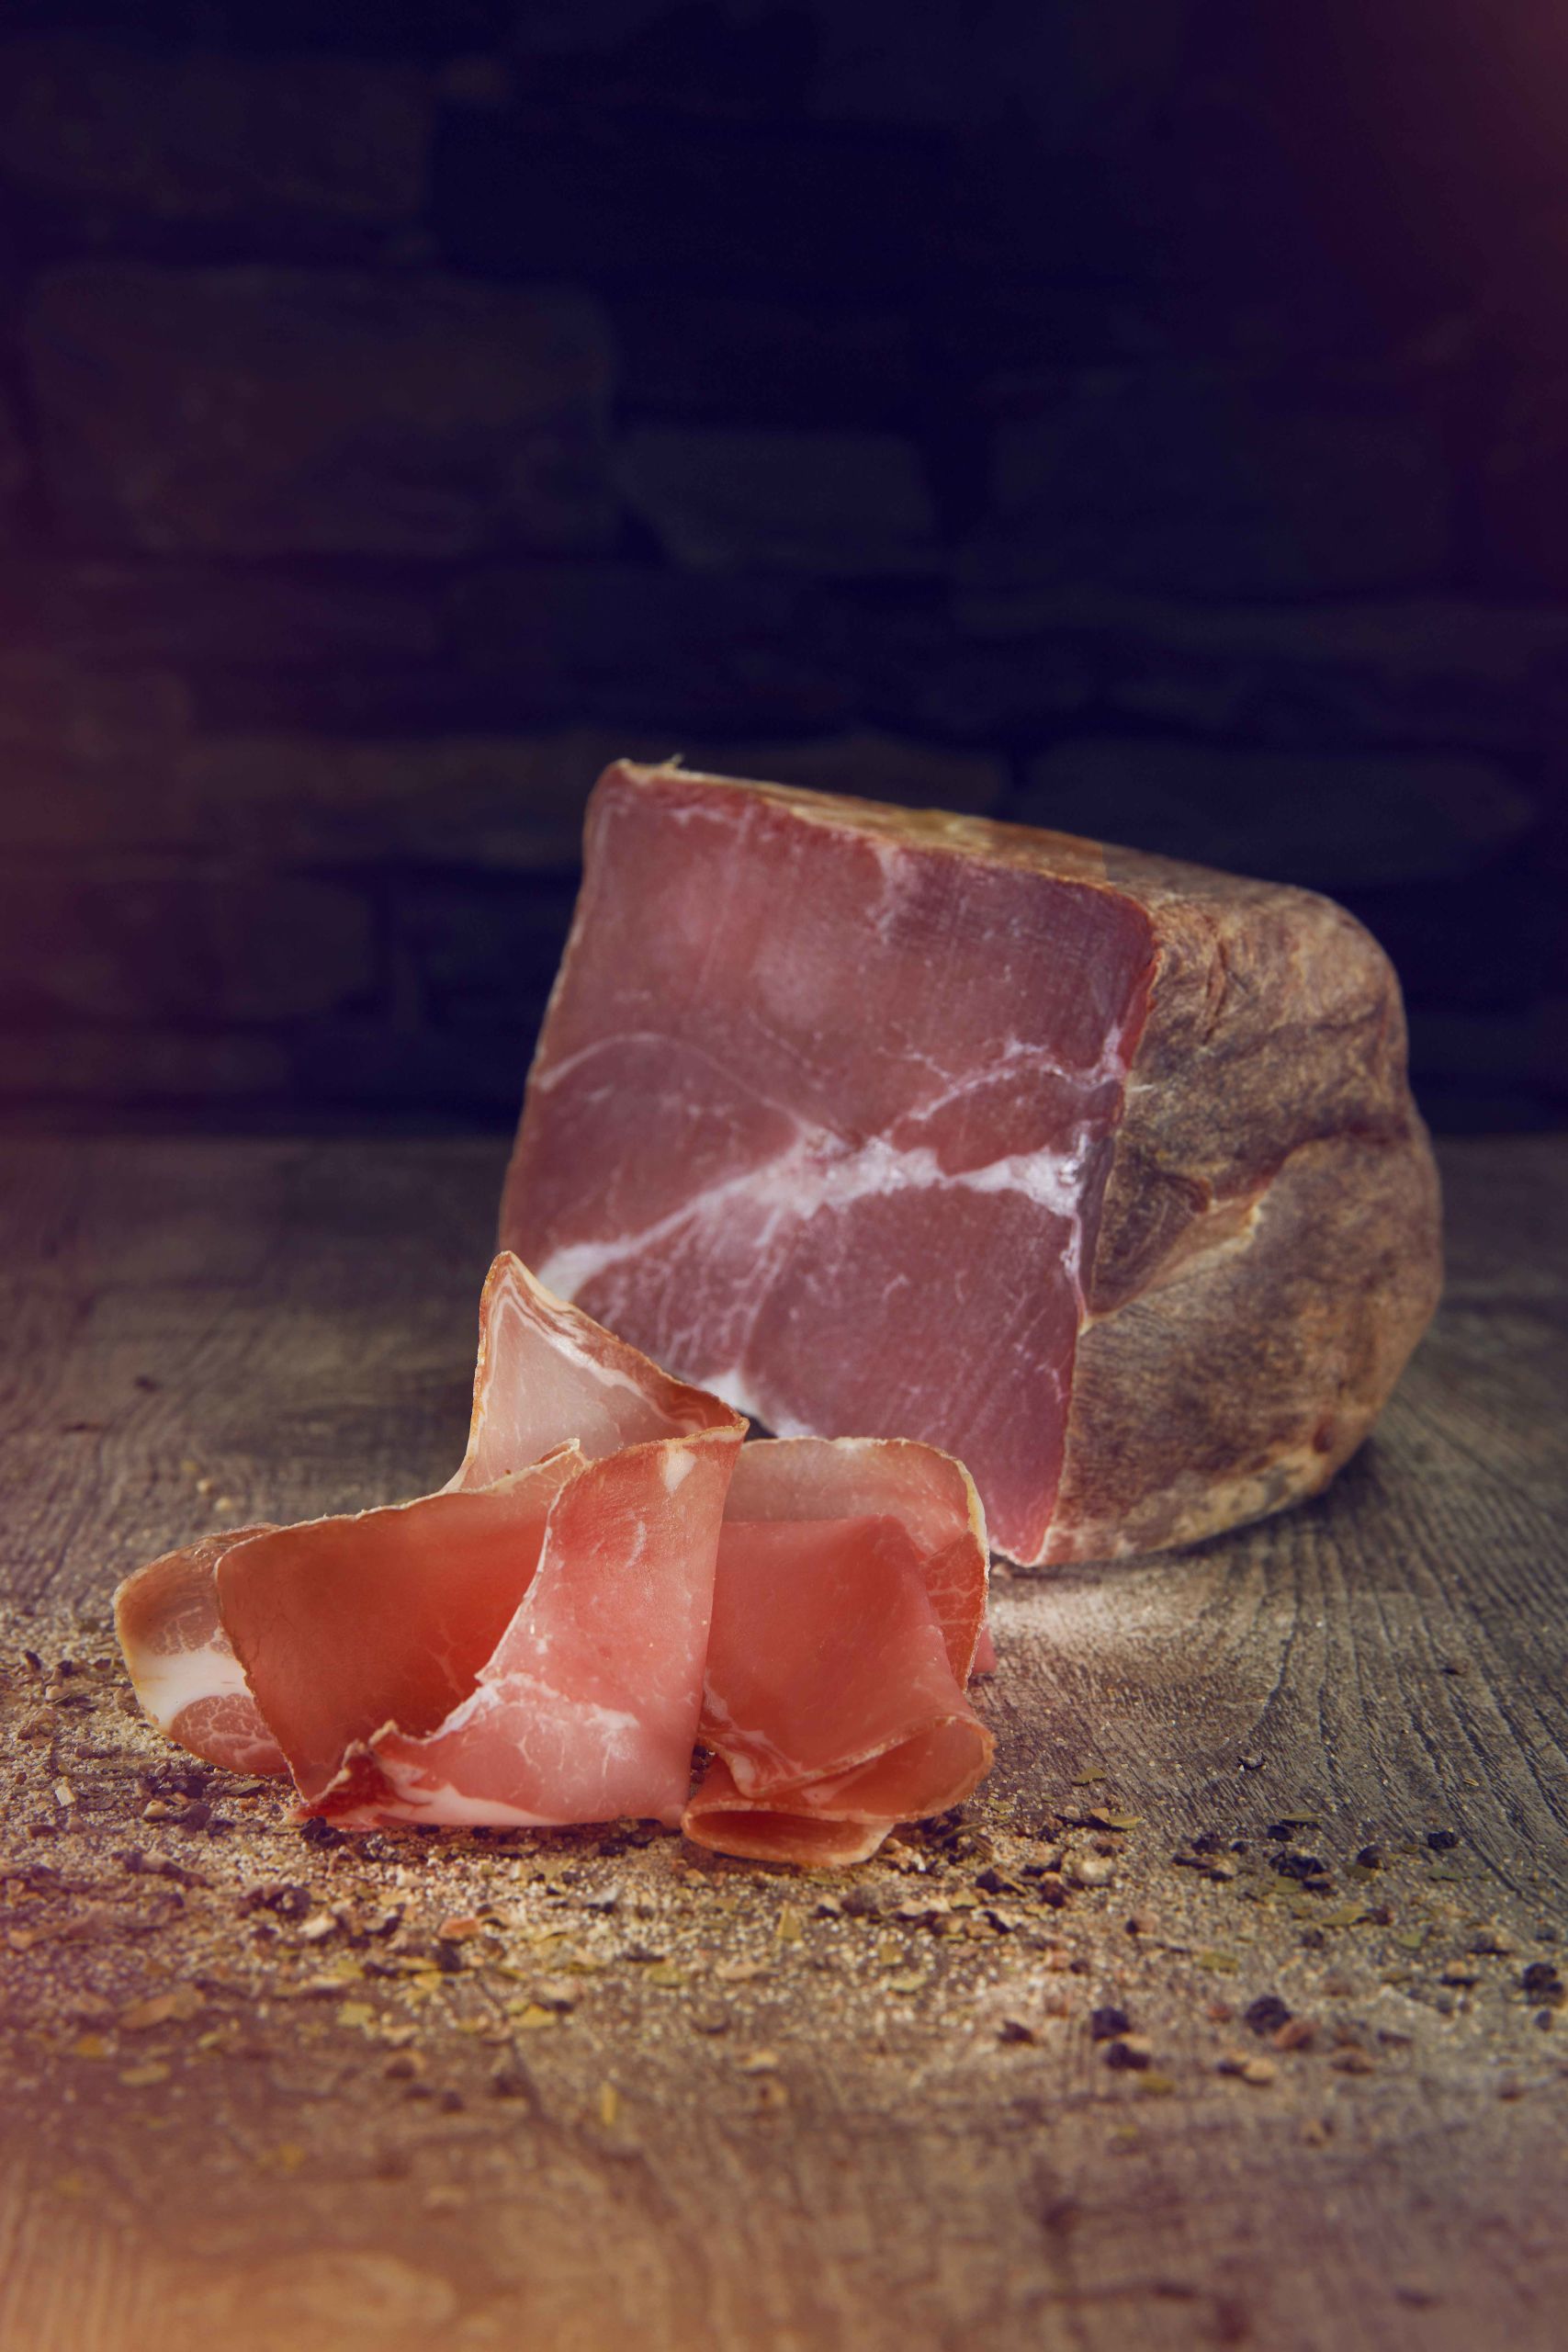 Raw ham from the Valais after drying for several weeks, Valais Wallis, Schweiz Suisse